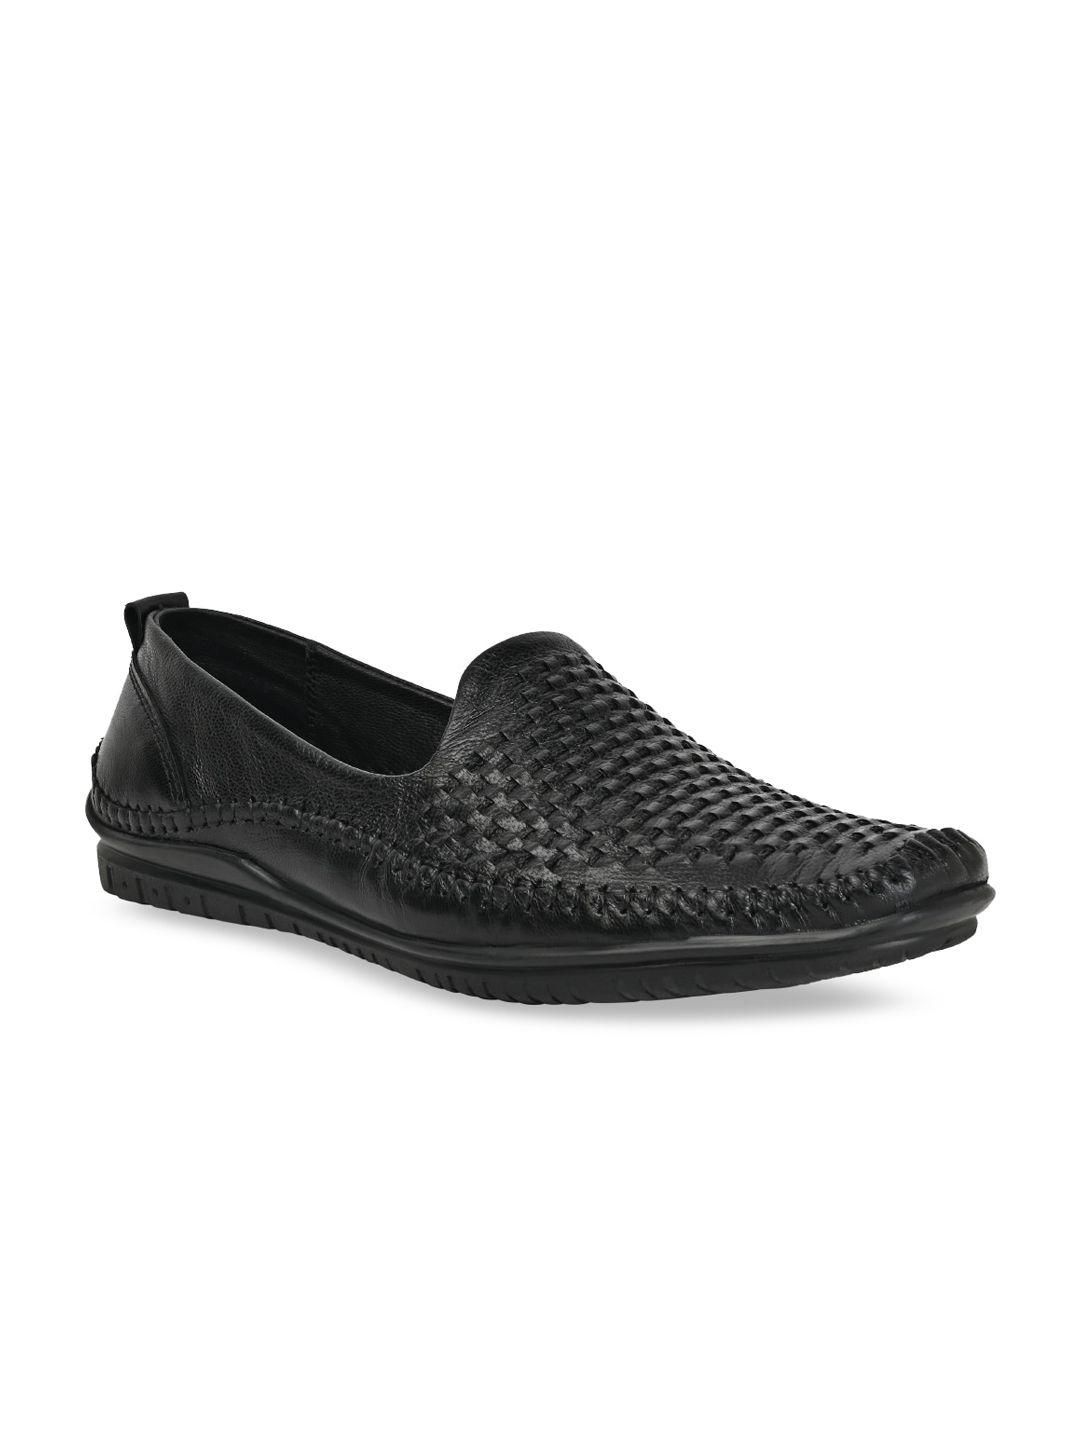 regal-men-textured-leather-loafers